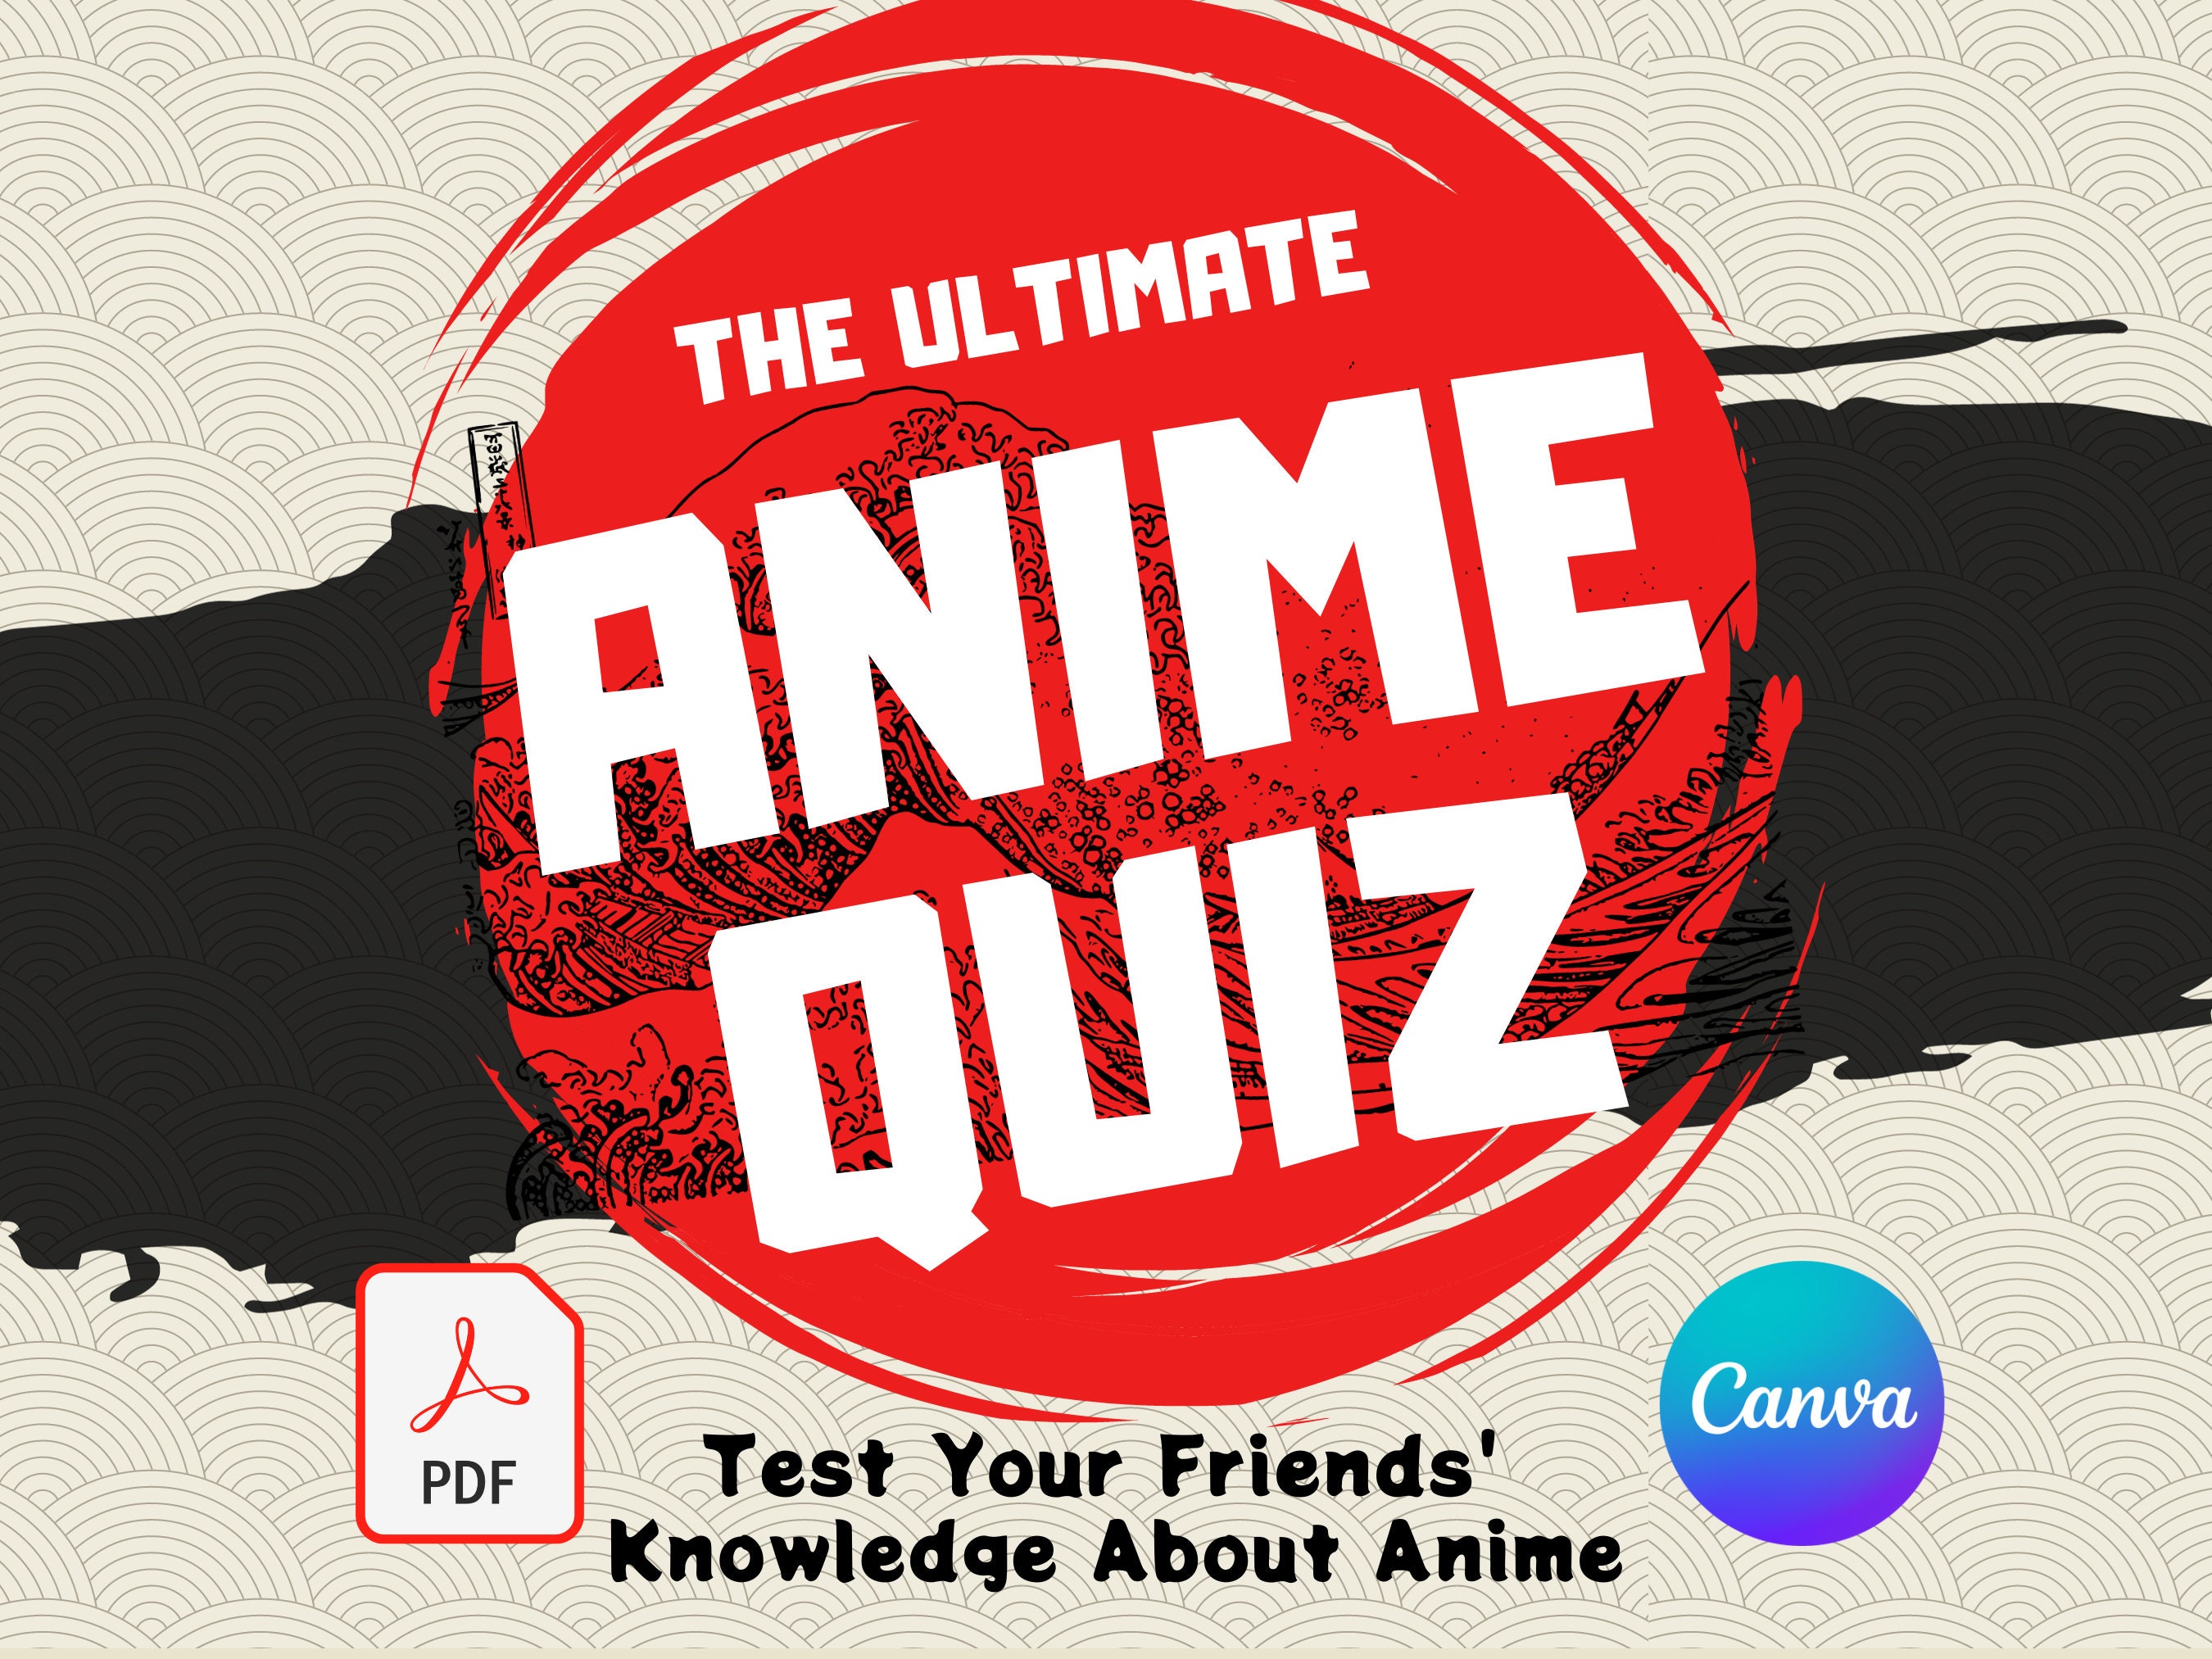 Ultimate Demon Slayer Trivia Quiz Questions and Answers